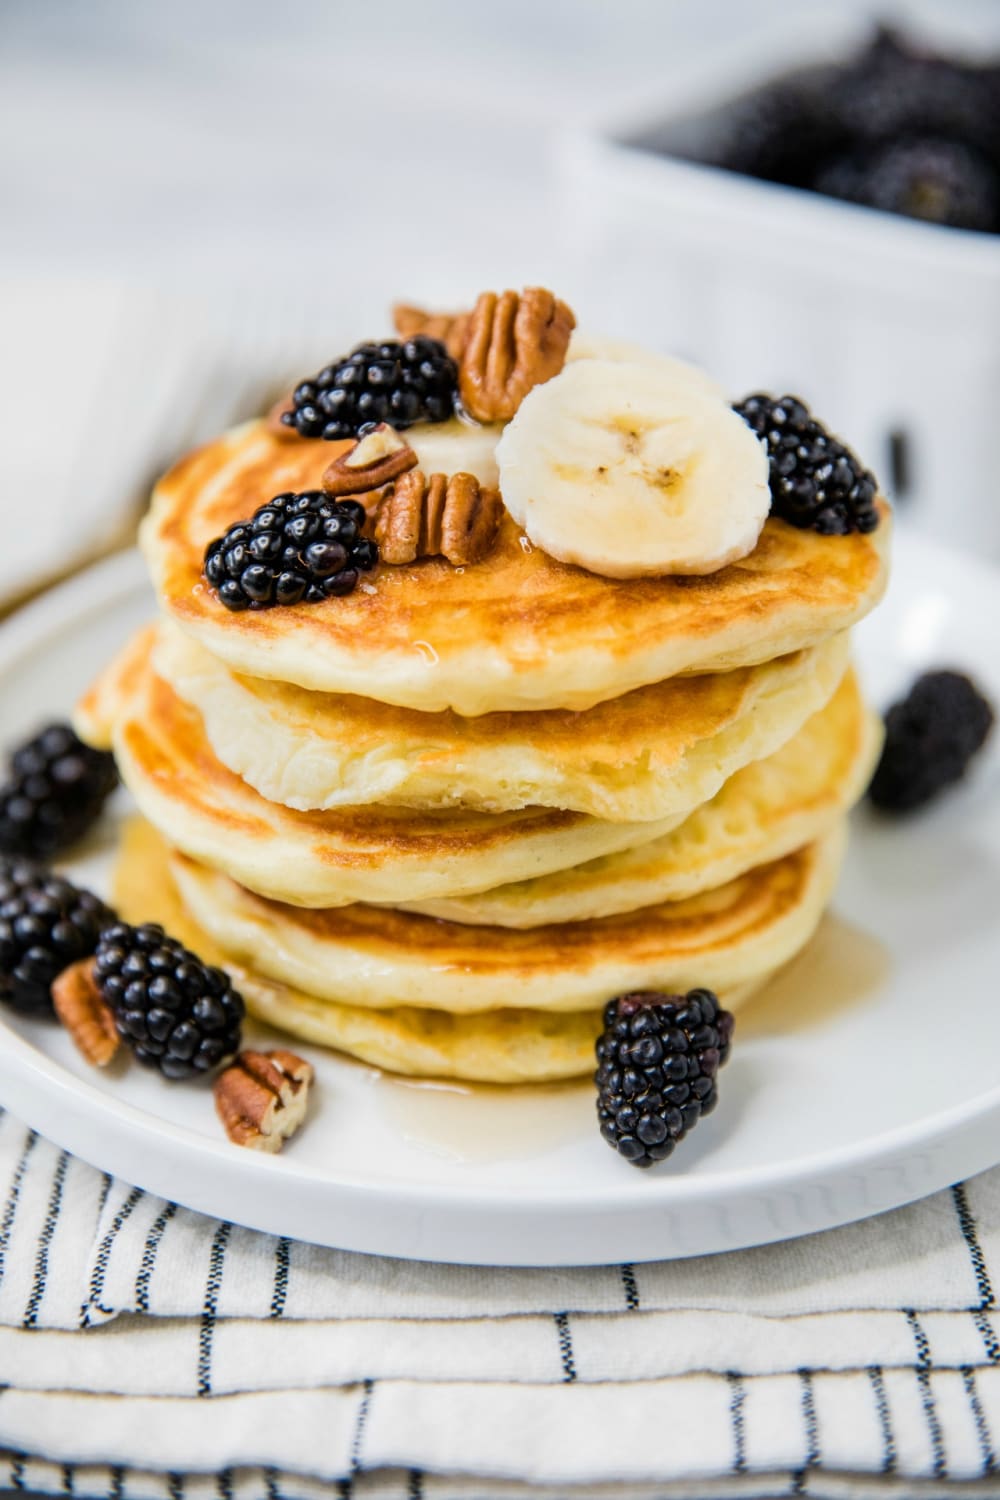 Start your day with delicious, fluffy gluten-free yogurt pancakes!